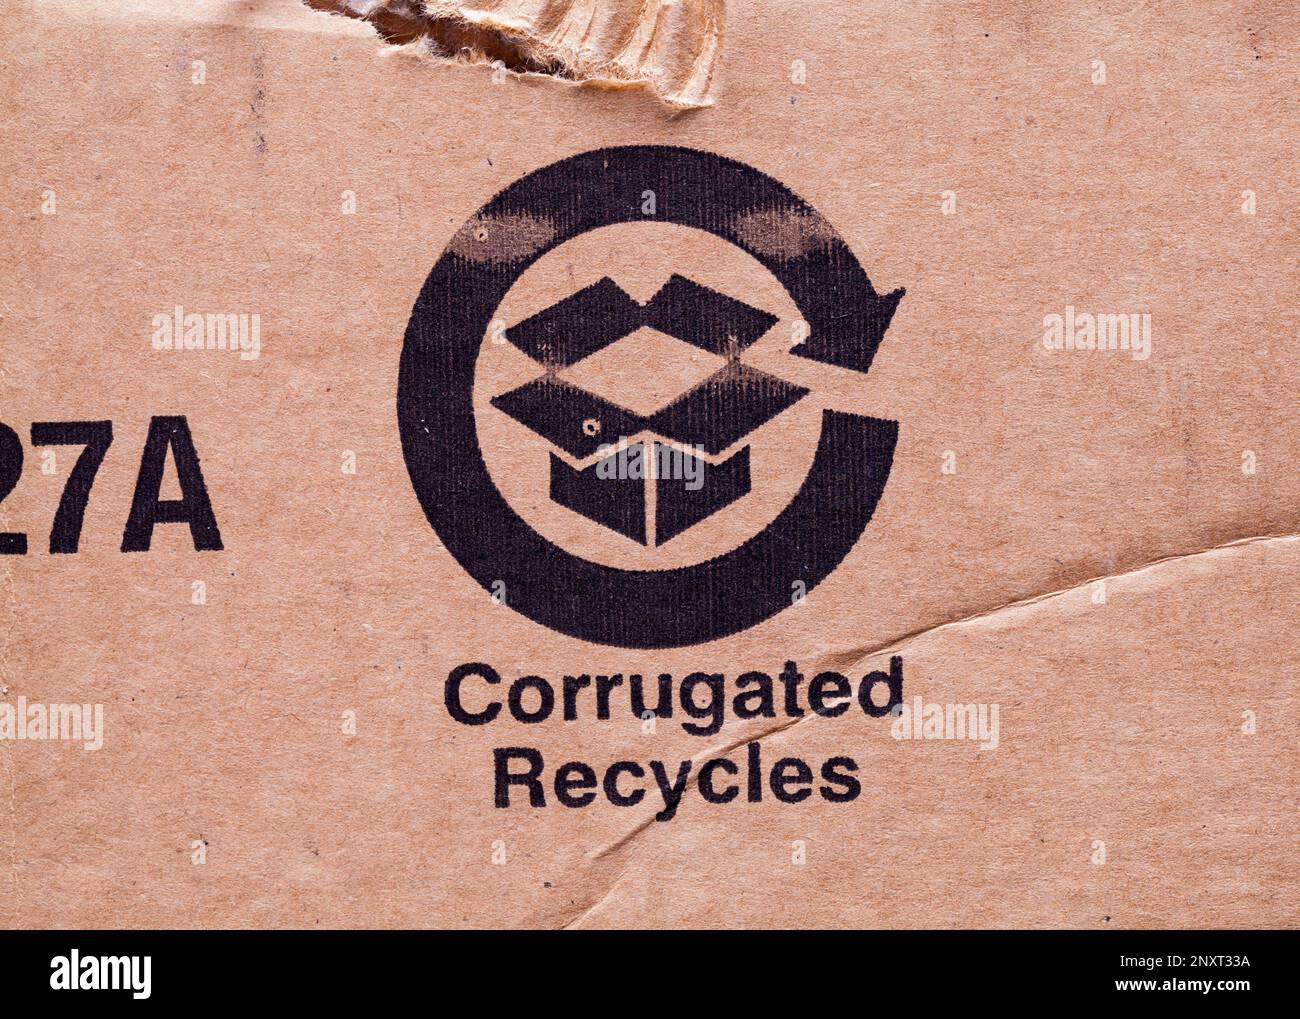 Brown Corrugated Cardboard Recycles Symbol Backgound. Stock Photo